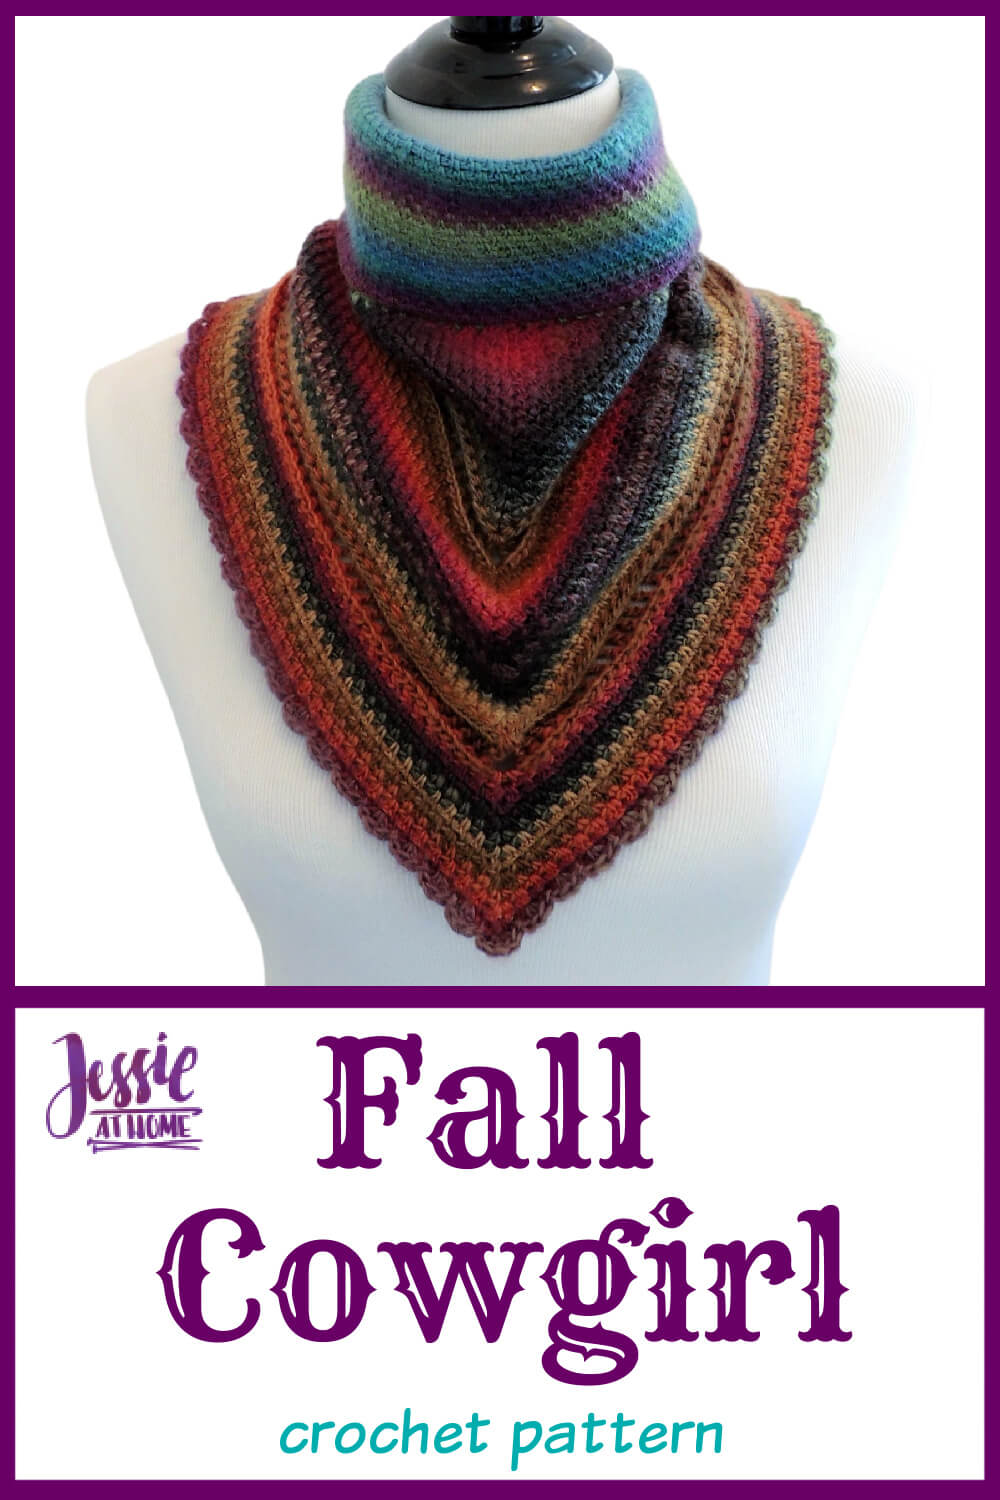 Fall Cowgirl - A feisty crochet cowl for fall fun